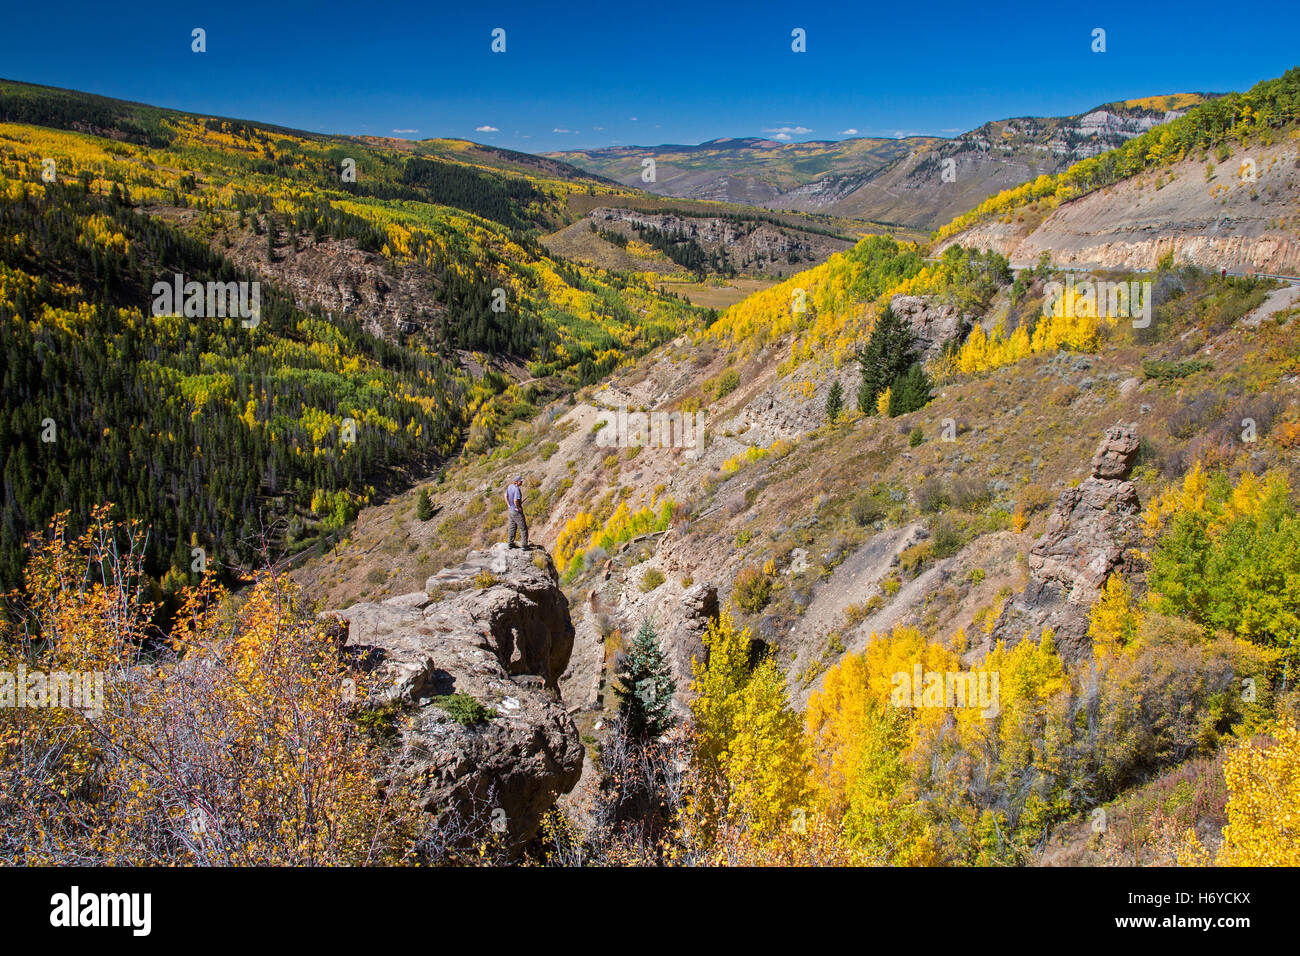 Leadville, Colorado - Autumn in the Rocky Mountains. A man stands on a rock overlooking a valley below Leadville. Stock Photo